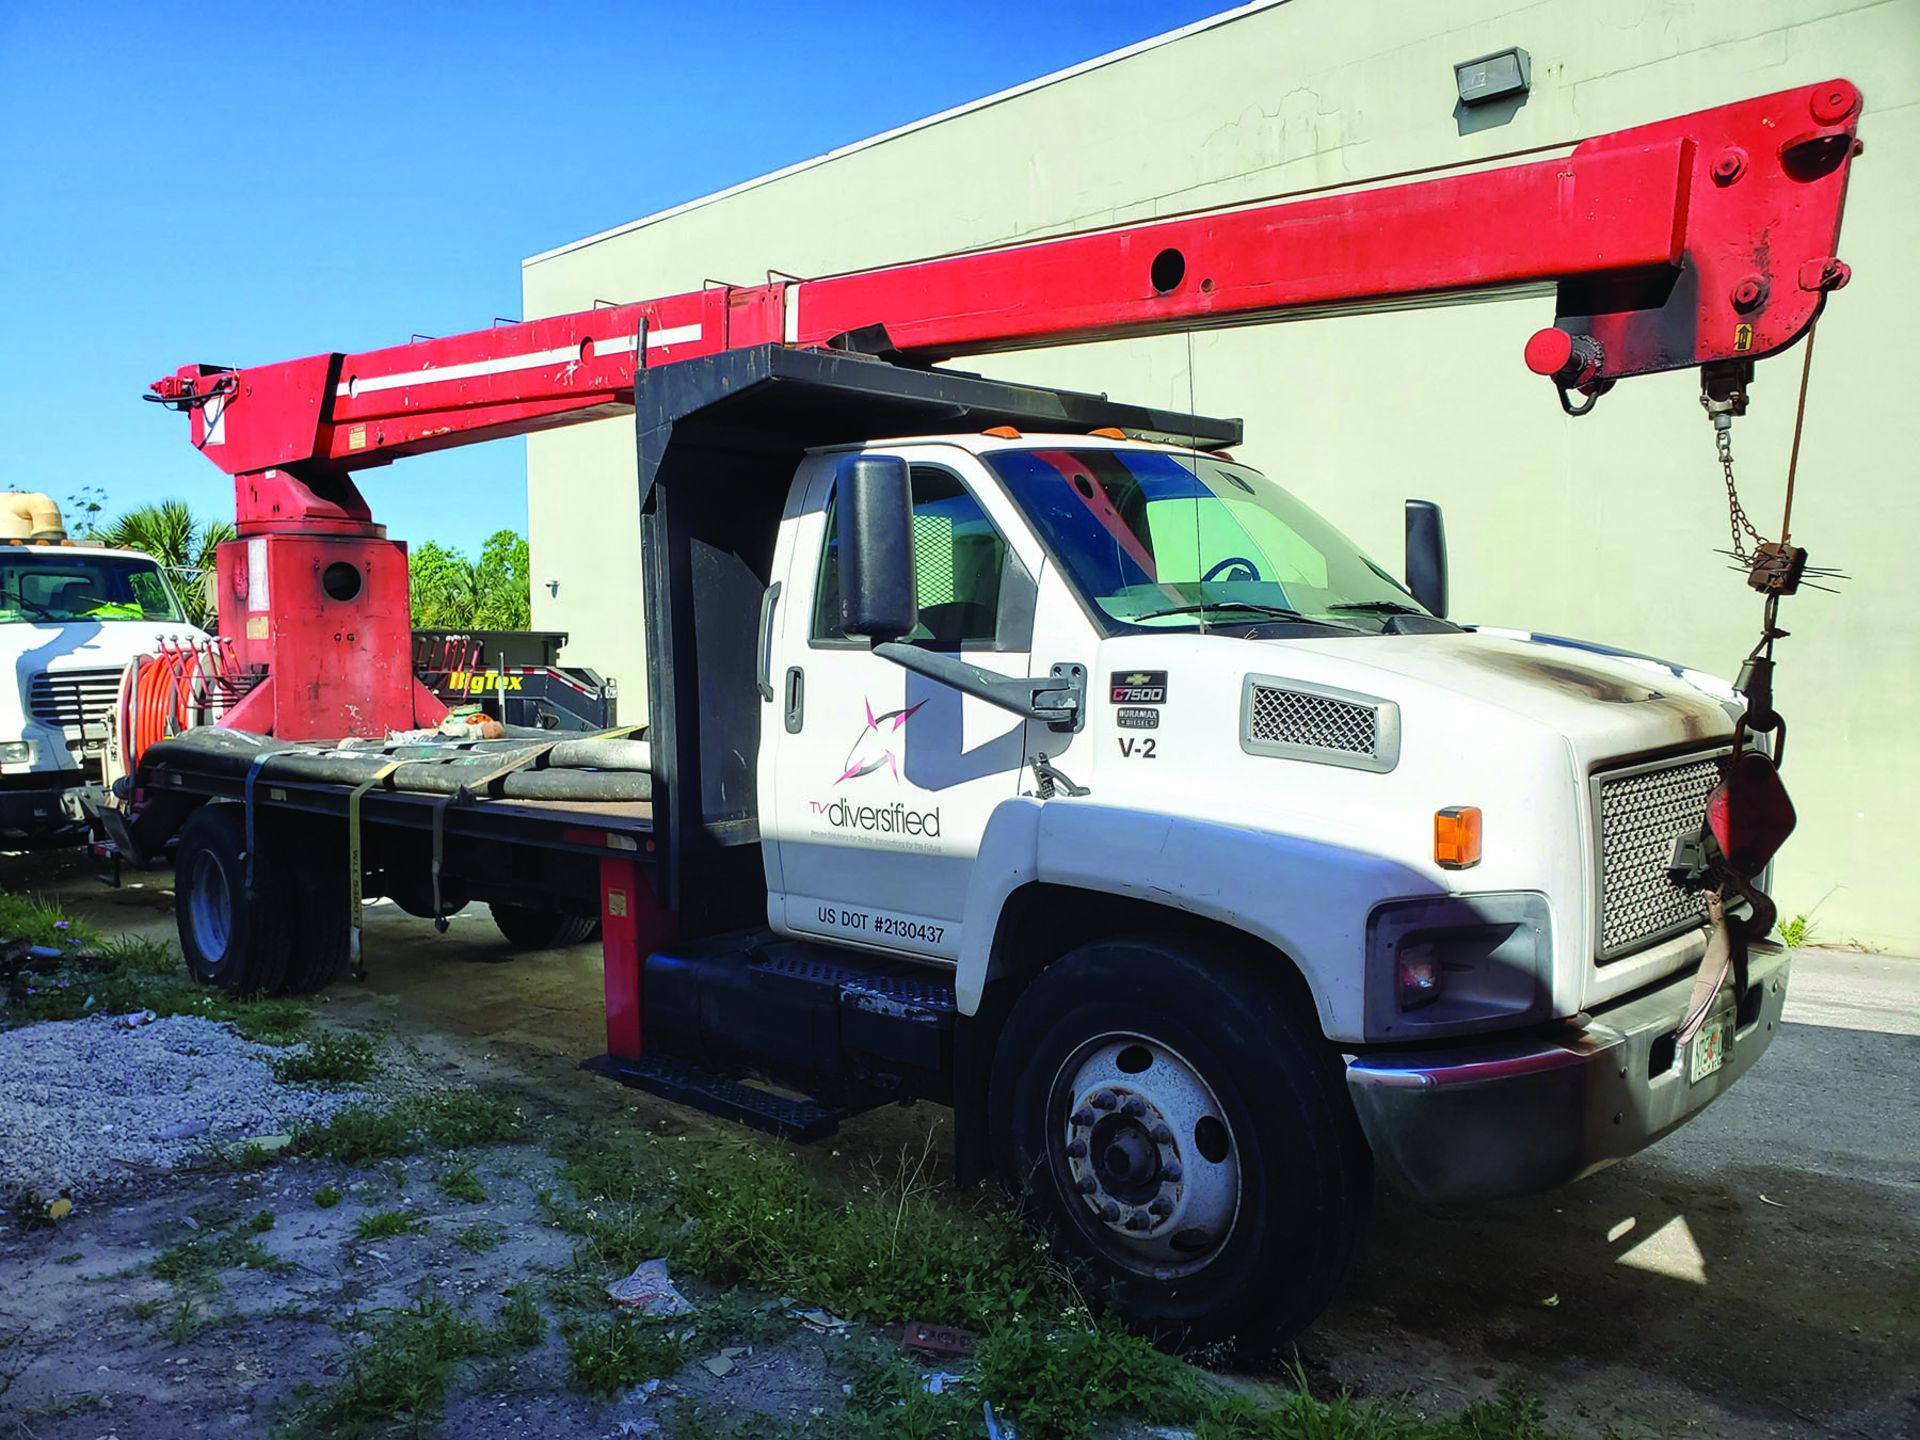 CHEVROLET C7500 S/A FLAT BED WITH 36' TELESCOPING BOOM CRANE, MODEL RO STNGERTC120, 3-STAGE BOOM, - Image 10 of 13